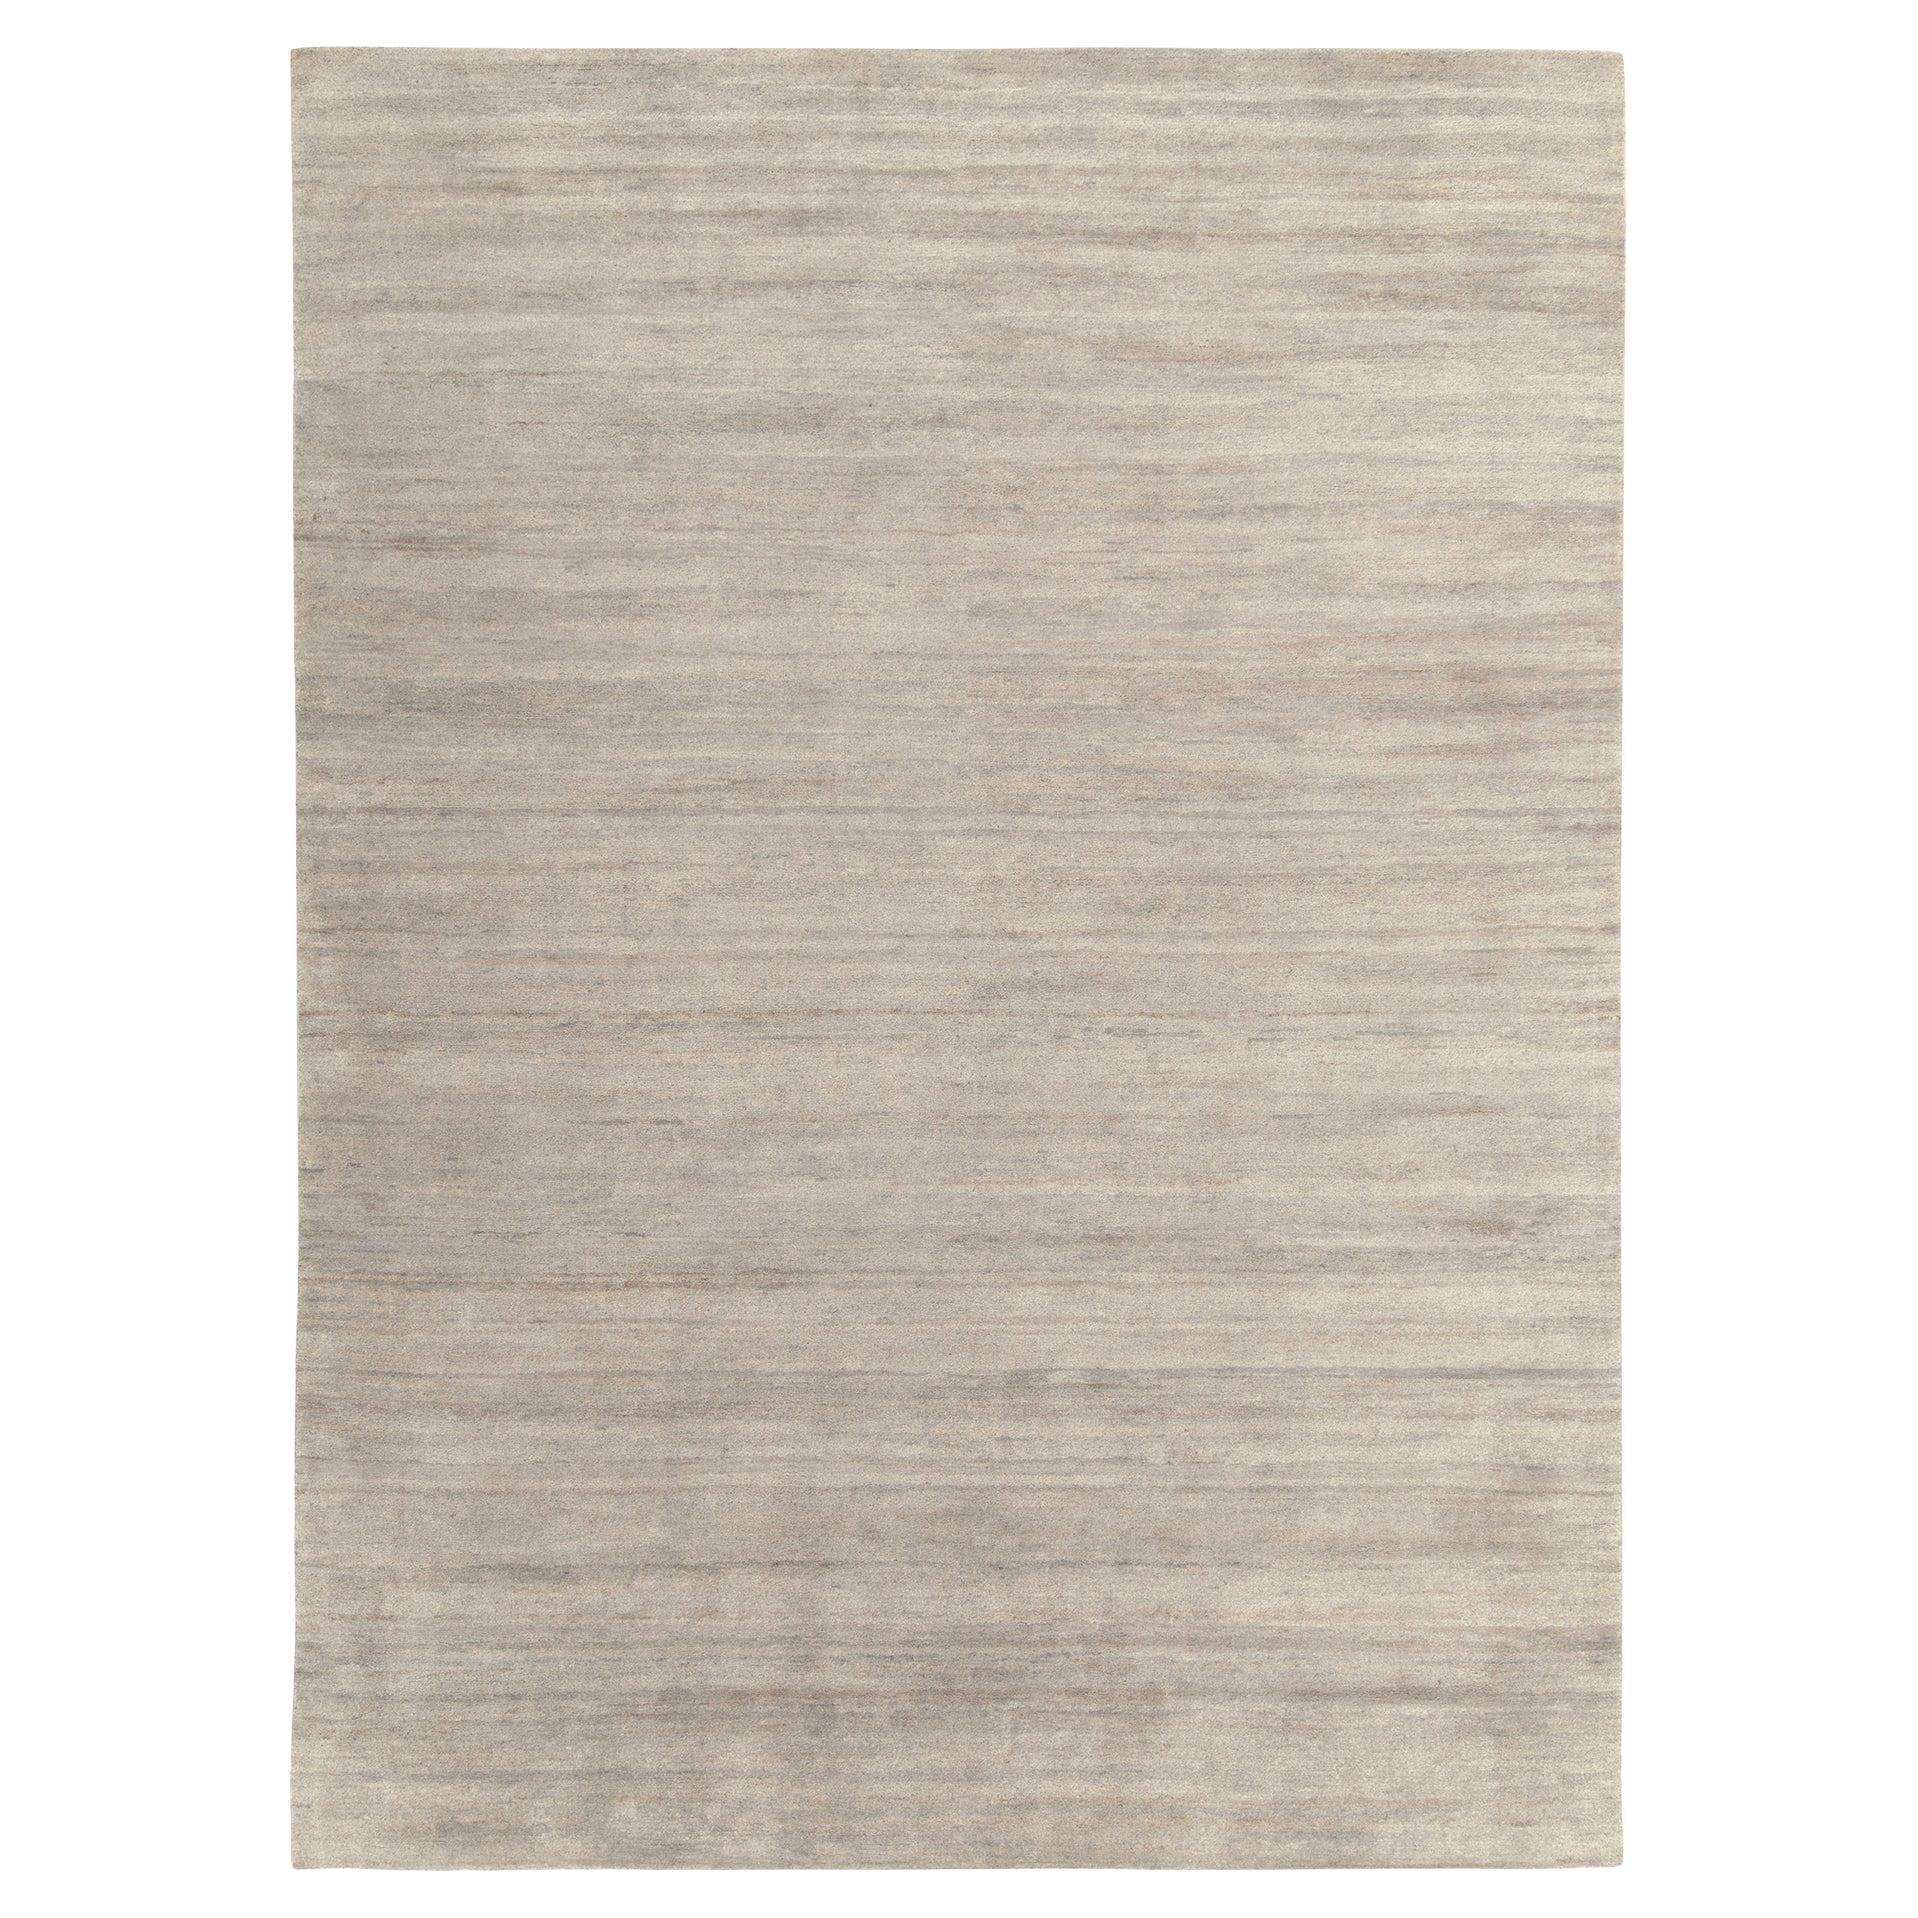 Rug & Kilim's Hand-Knotted Contemporary Rug in Striated Grey